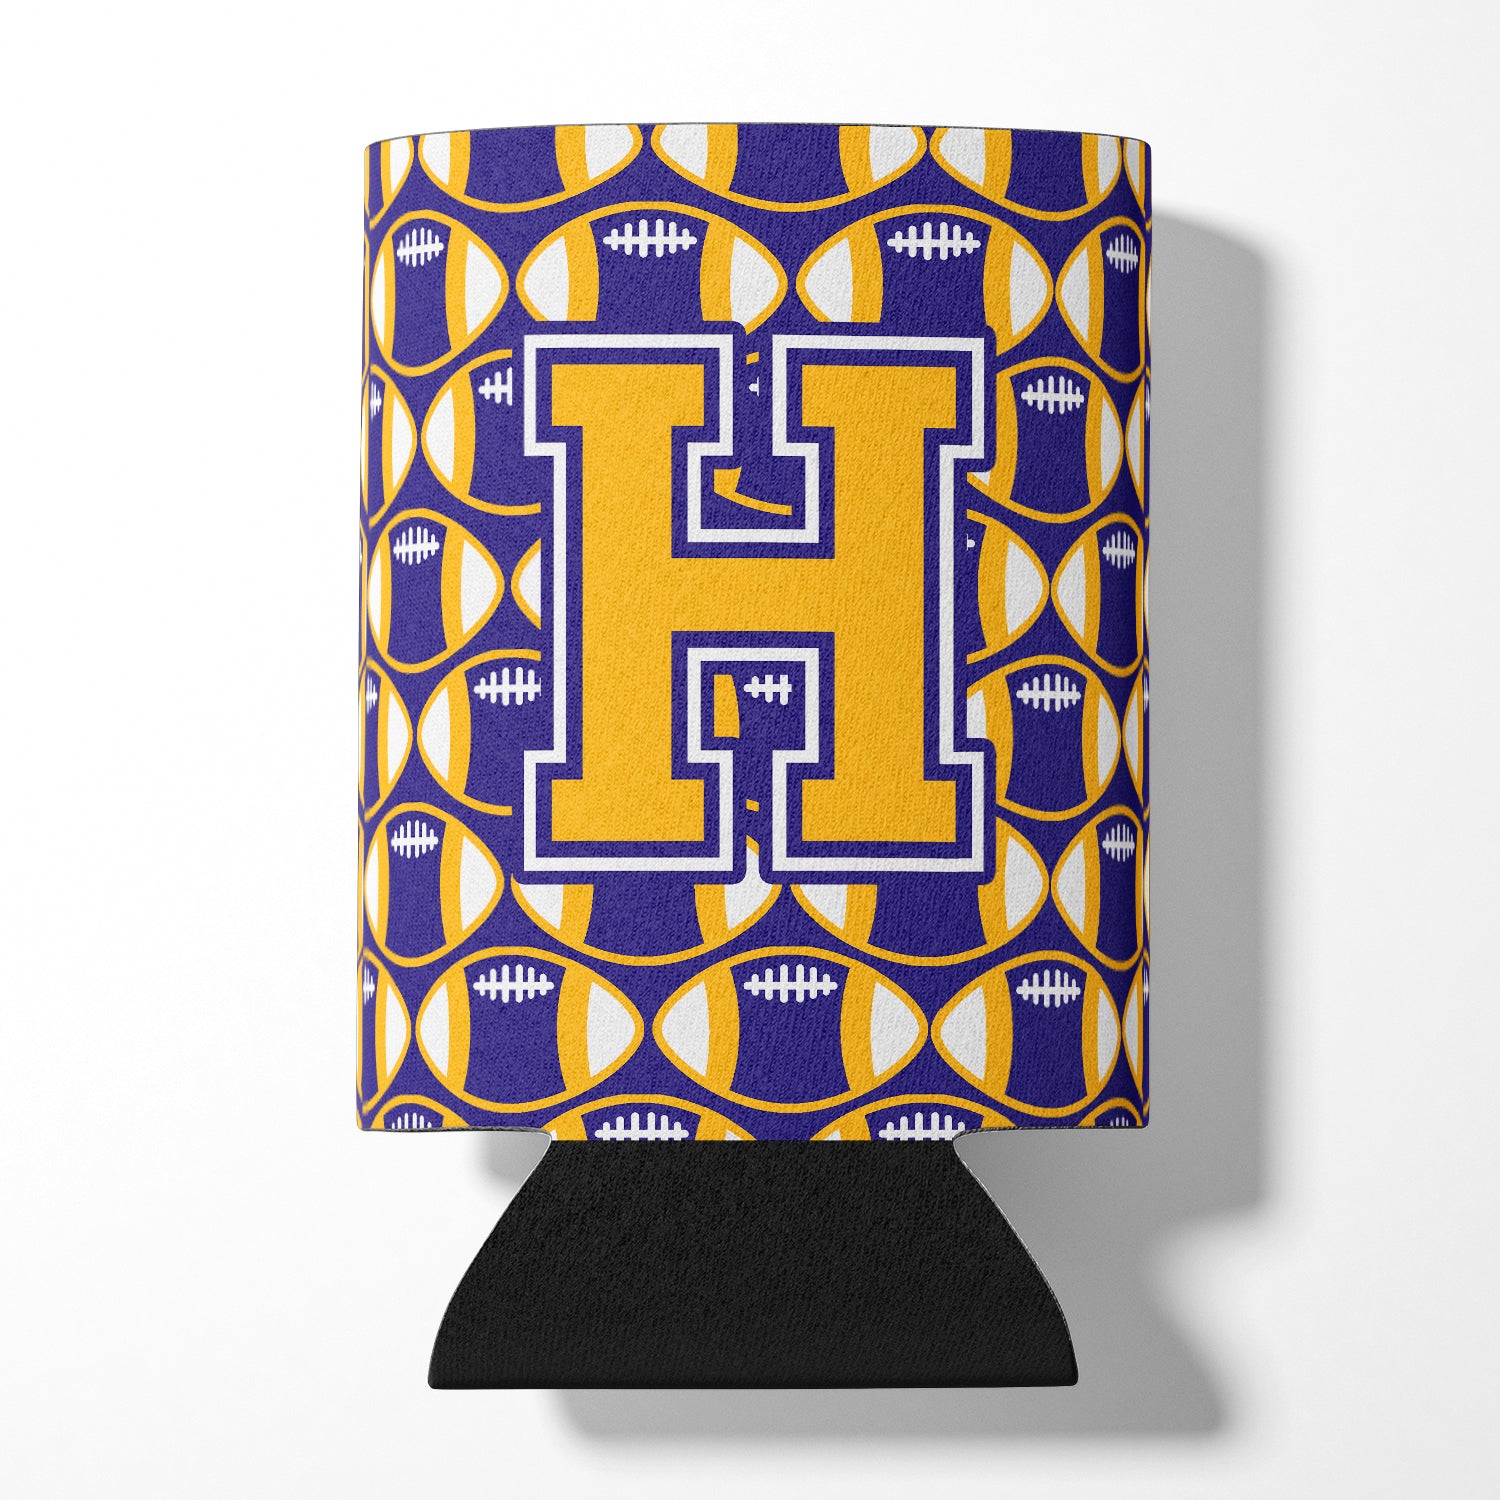 Letter H Football Purple and Gold Can or Bottle Hugger CJ1064-HCC